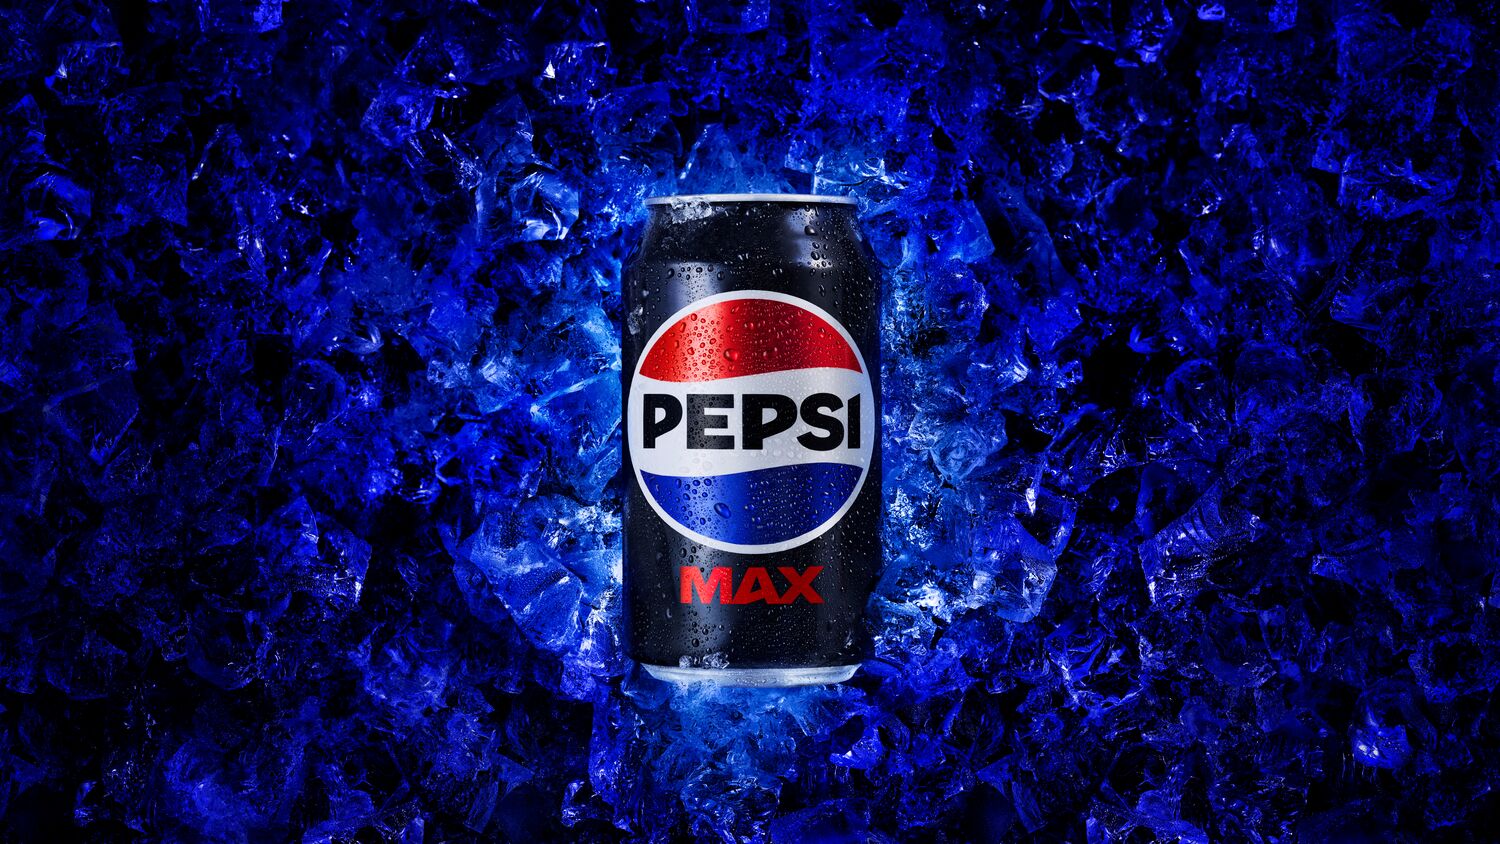 Pepsi unveils major rebrand to shake up the cola category | Britvic plc ...